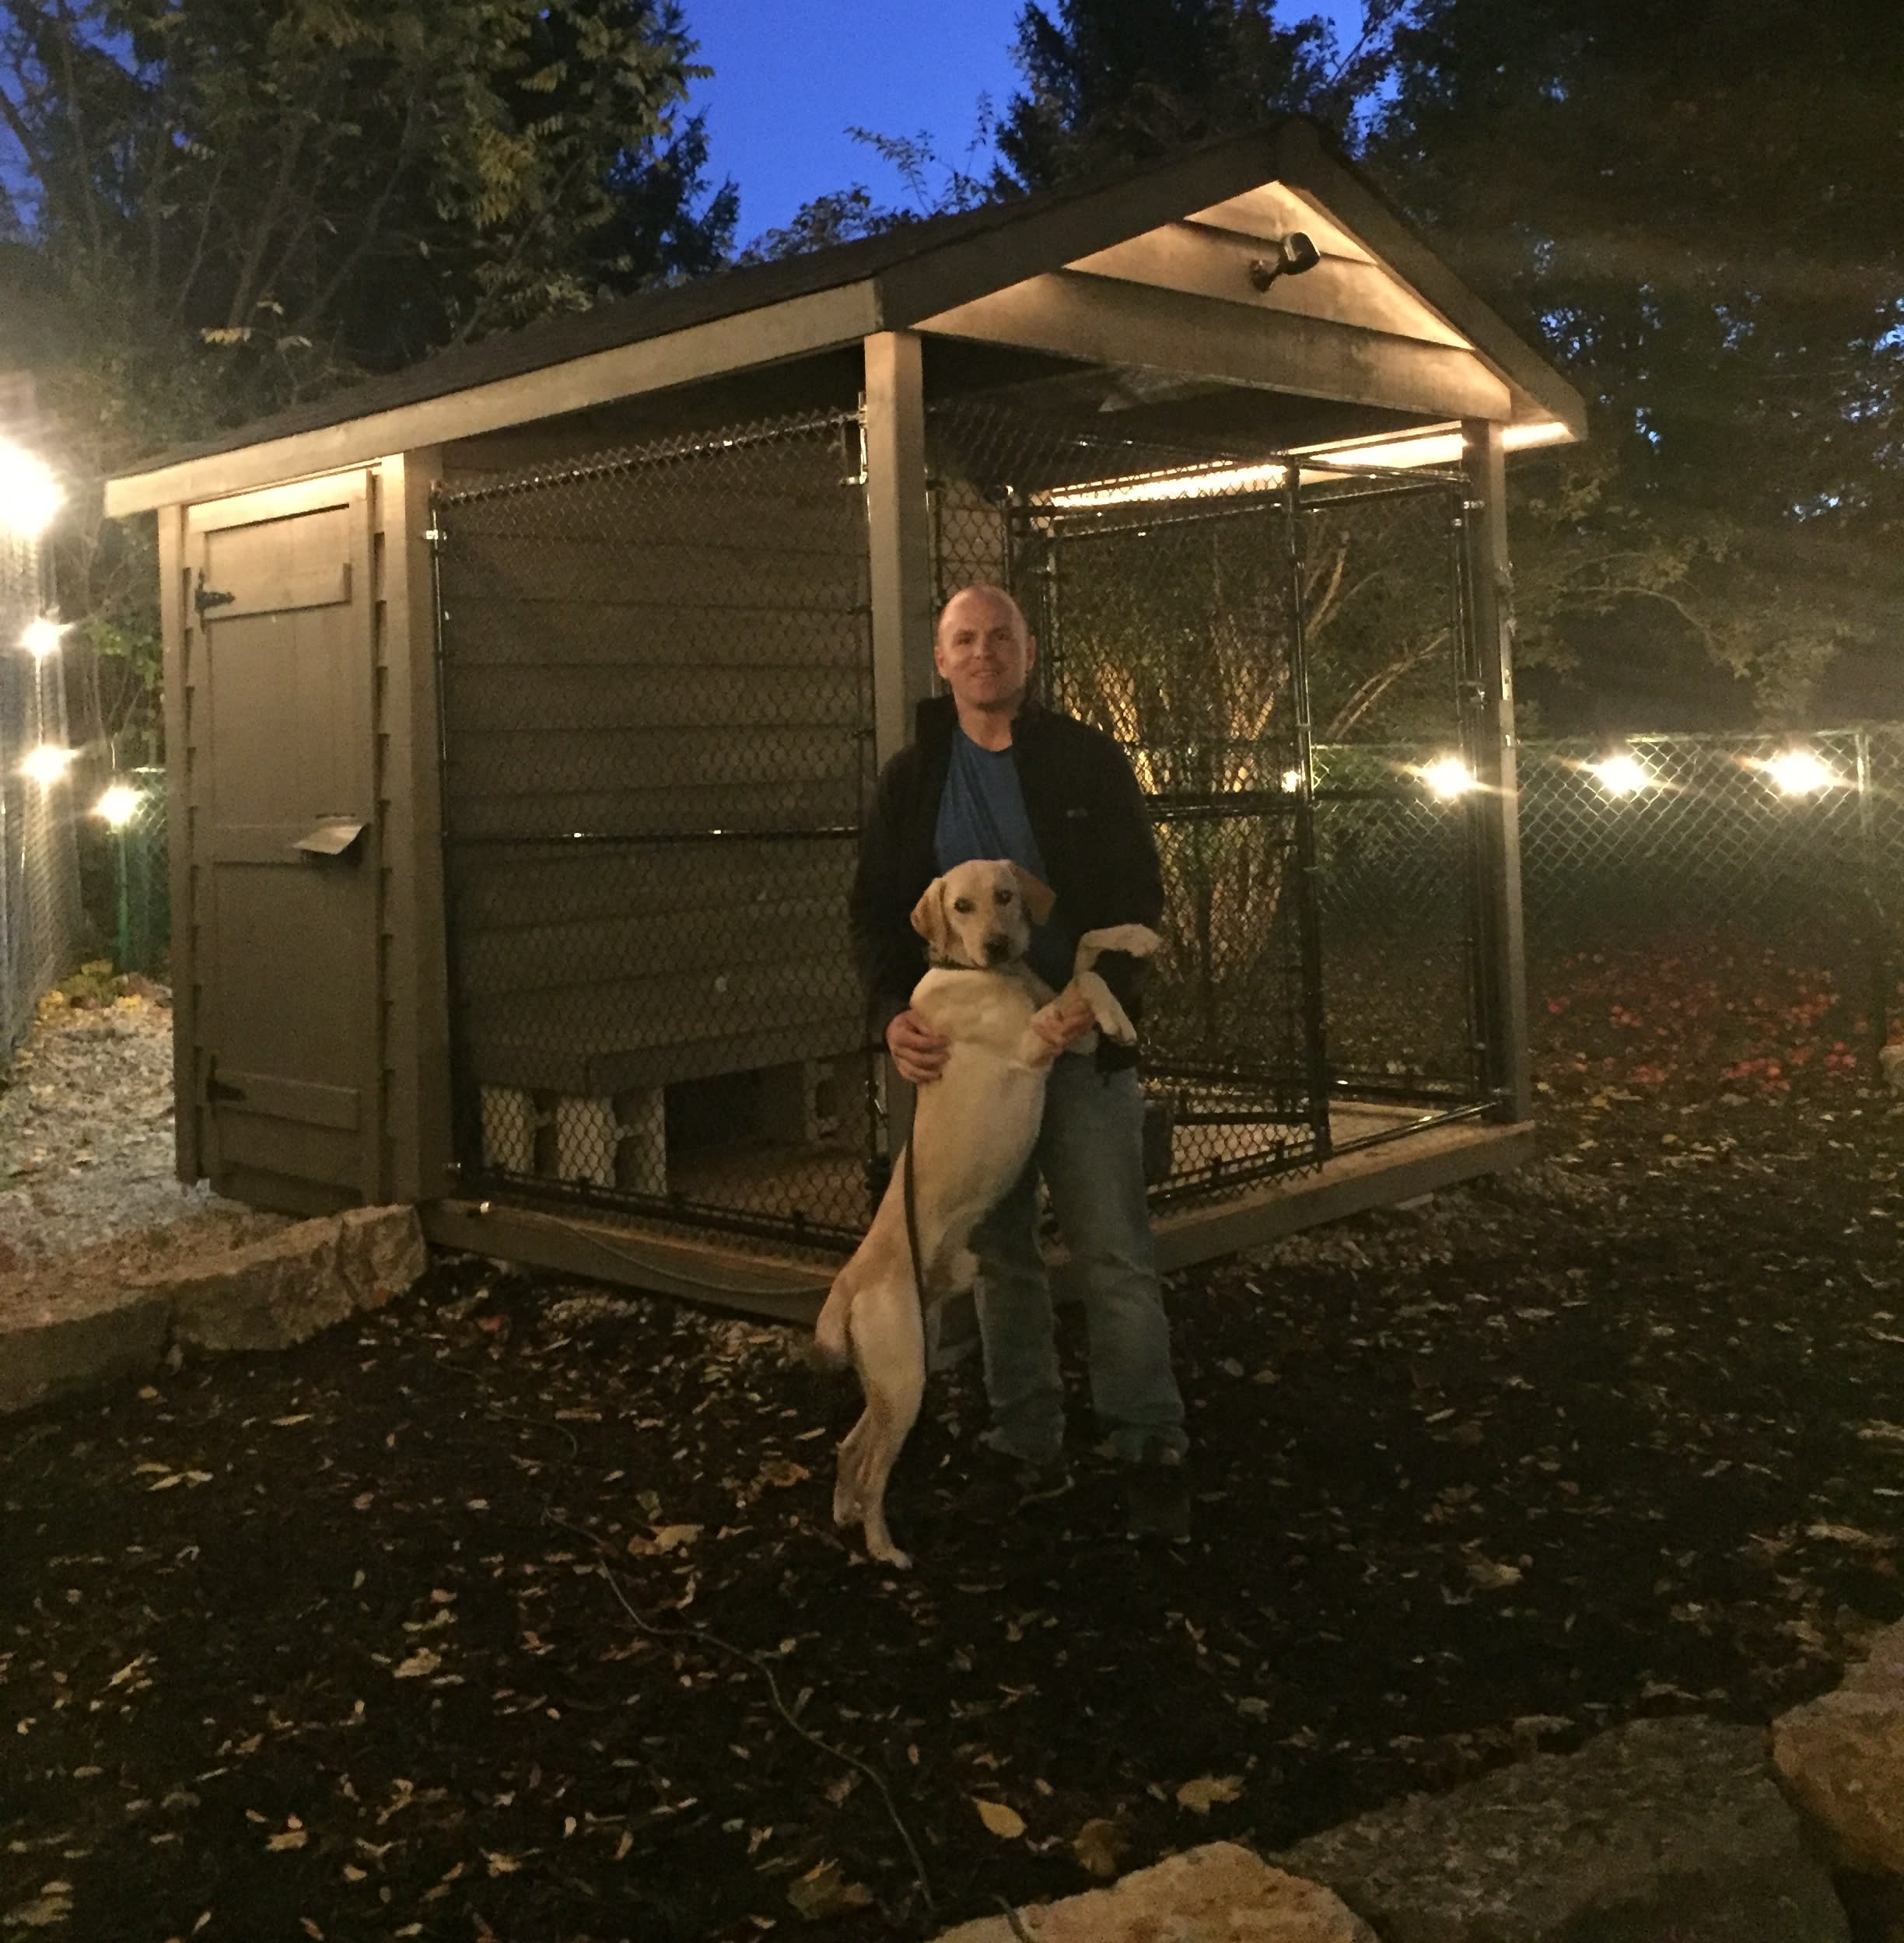 Officer Hoffman hugs Dash, as they stand beside his outdoor kennel.